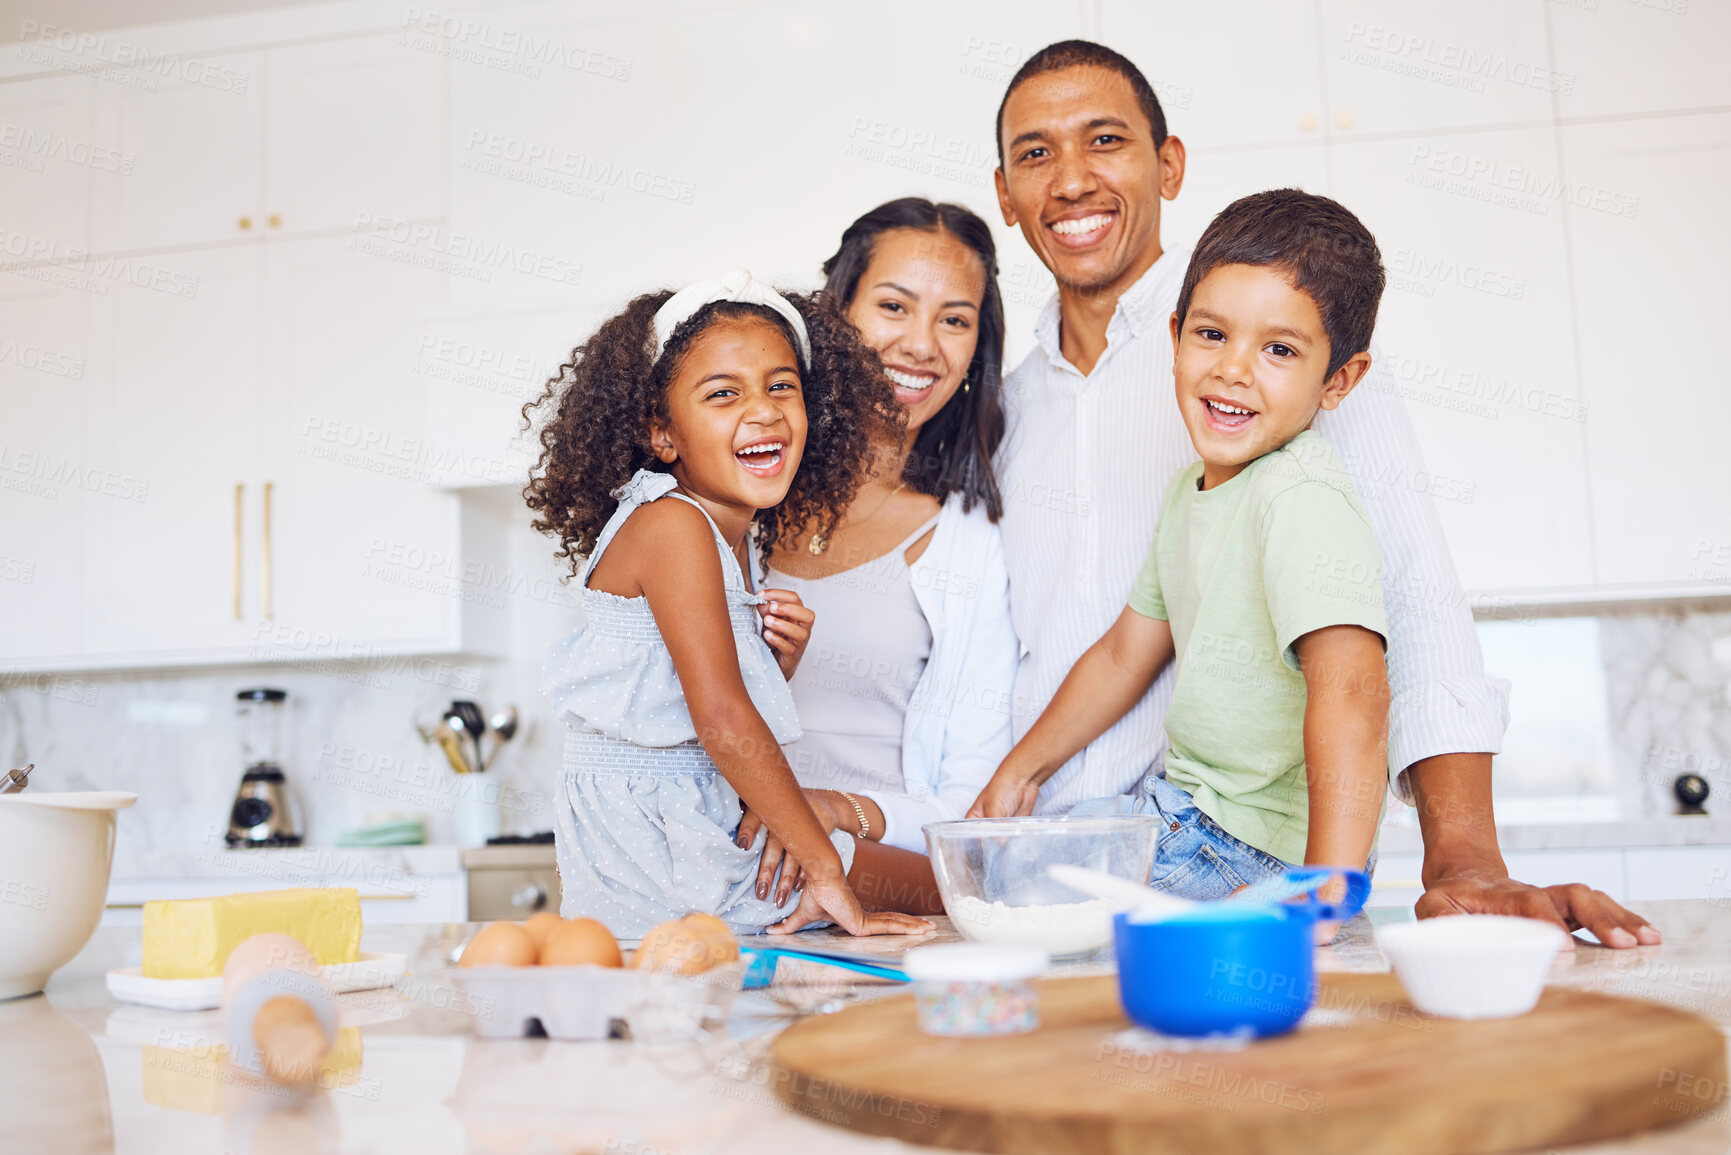 Buy stock photo Baking, family bonding and happy in the kitchen for learning development and relationship growth. Black people spend quality time together, ingredients to bake and smile while cooking at home. 